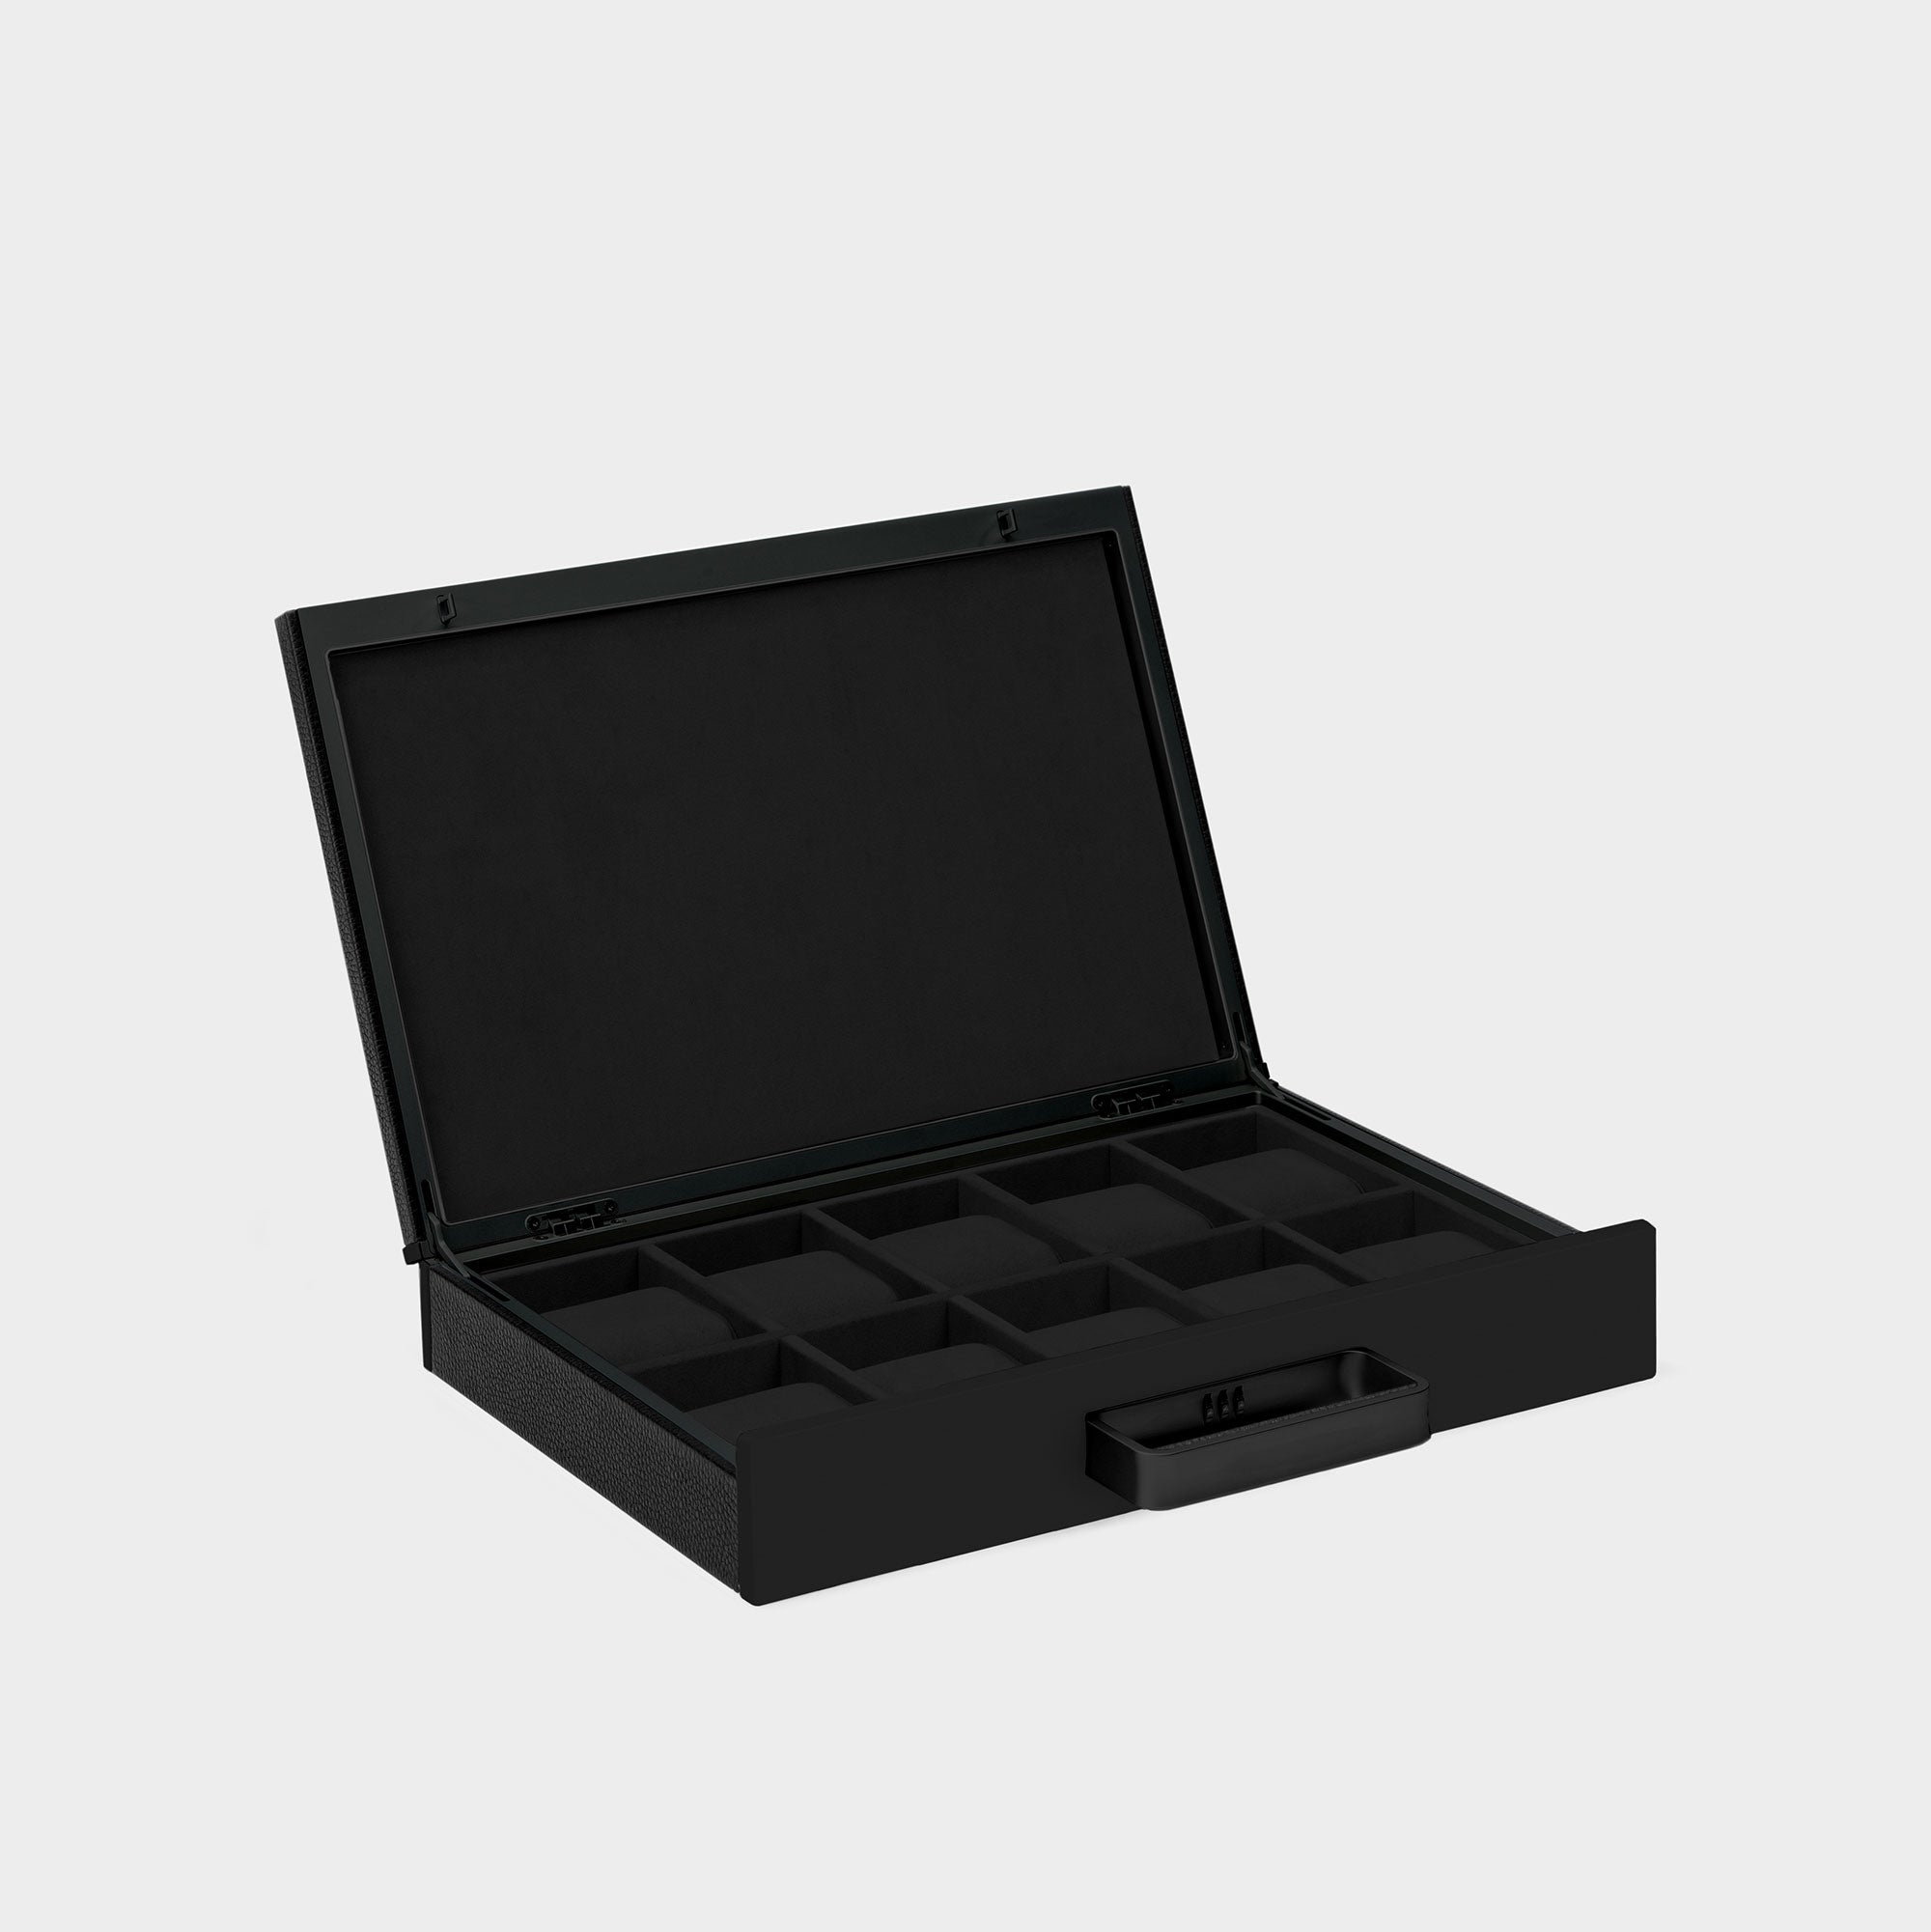 Charles Simon Mackenzie 10 watch briefcase in all black made from fine leather, aluminum and carbon fiber casing and soft Alcantara interior lining